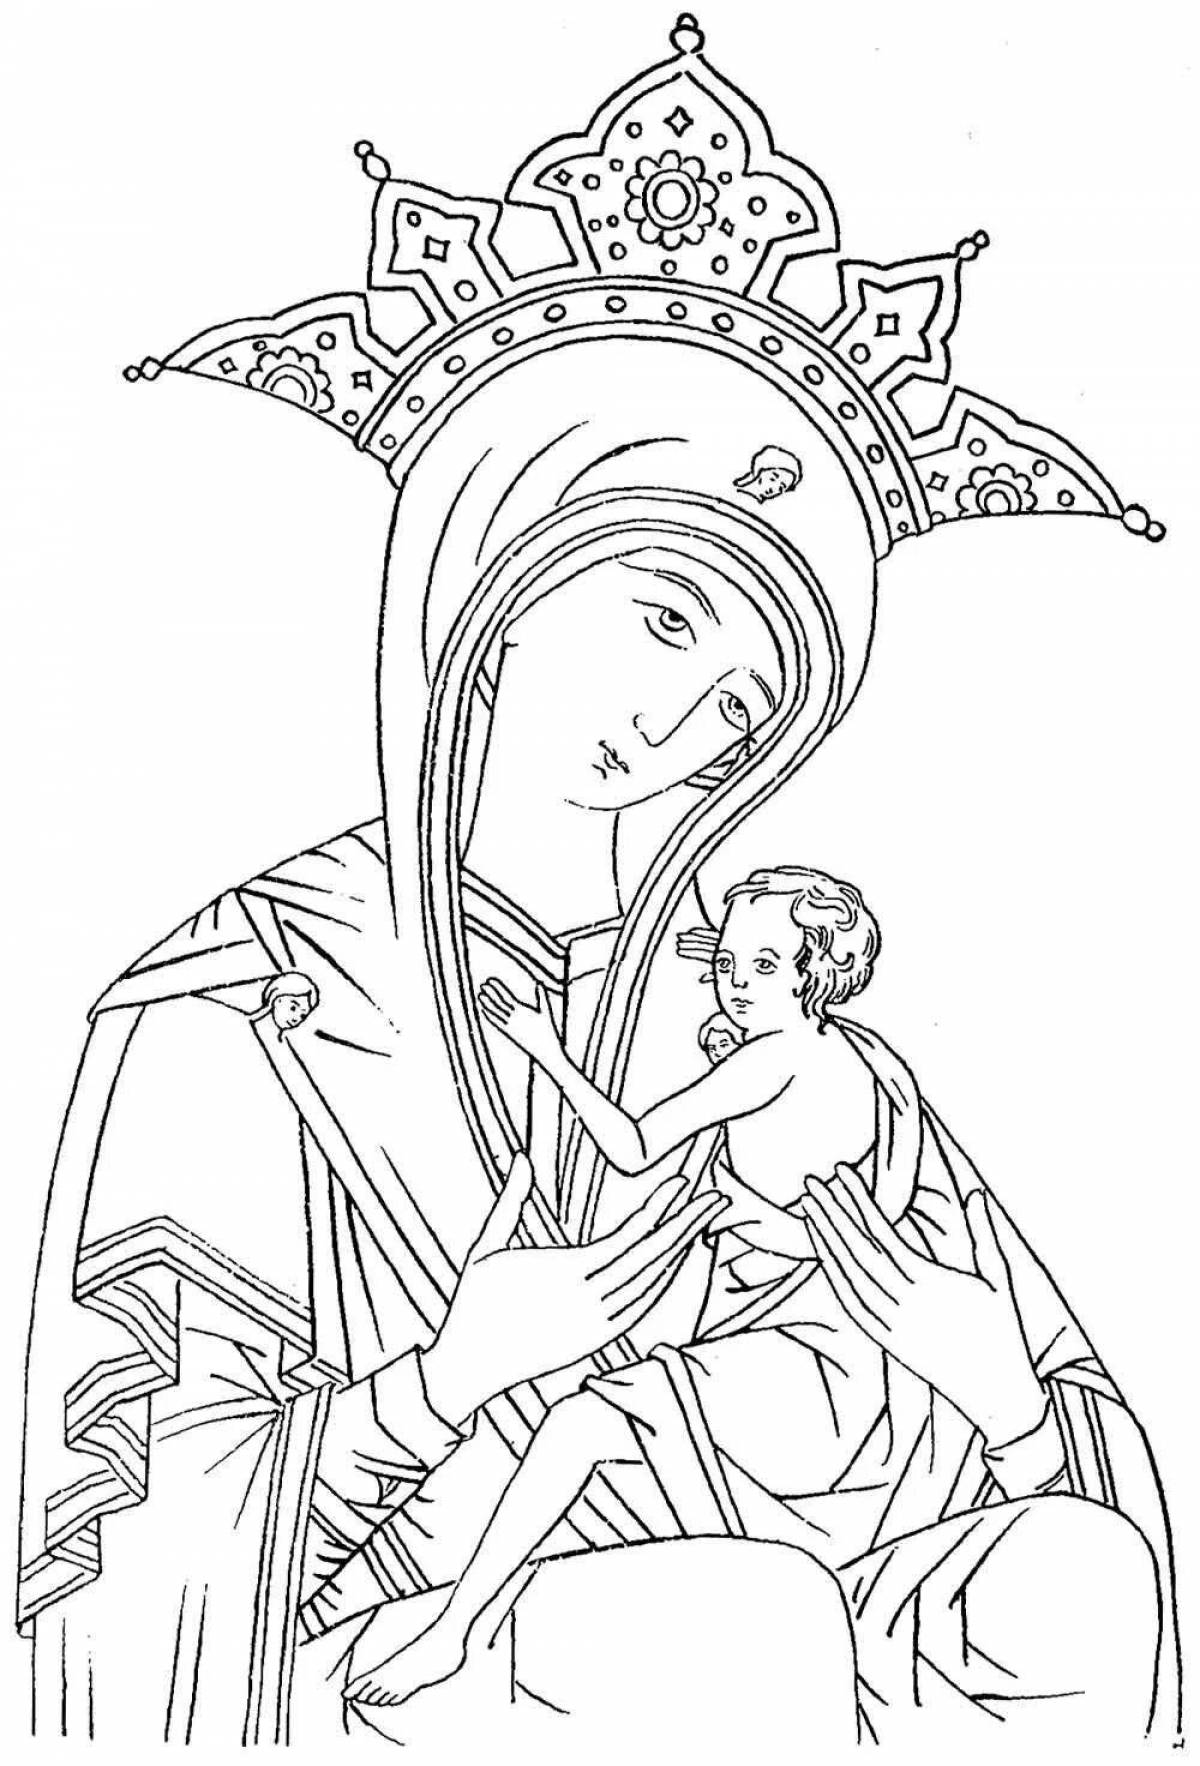 Exalted coloring of the virgin mary and child